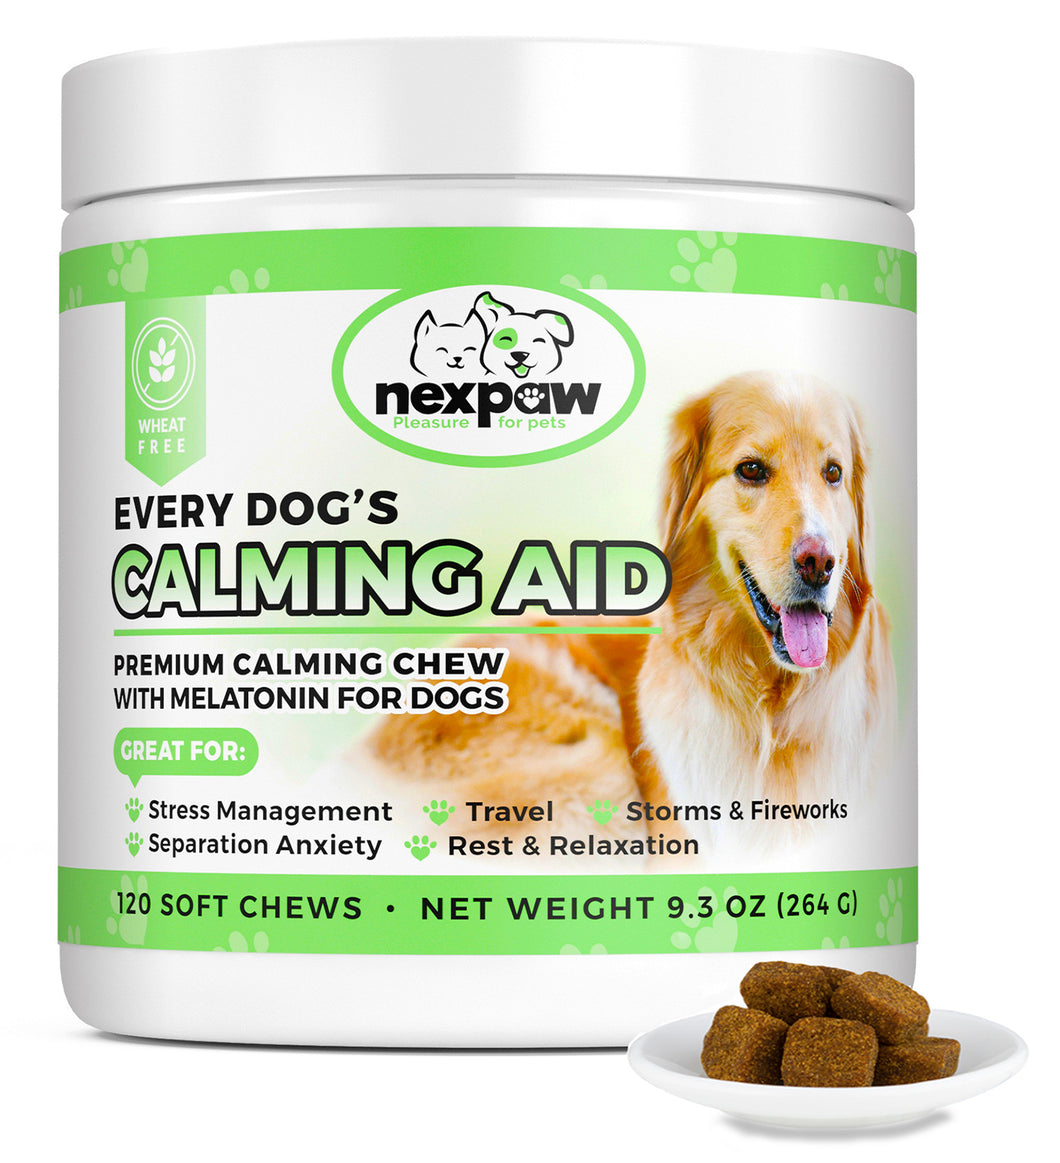 Every Dog's Daily Calming Aid – 120 Wheat-Free Soft Chews